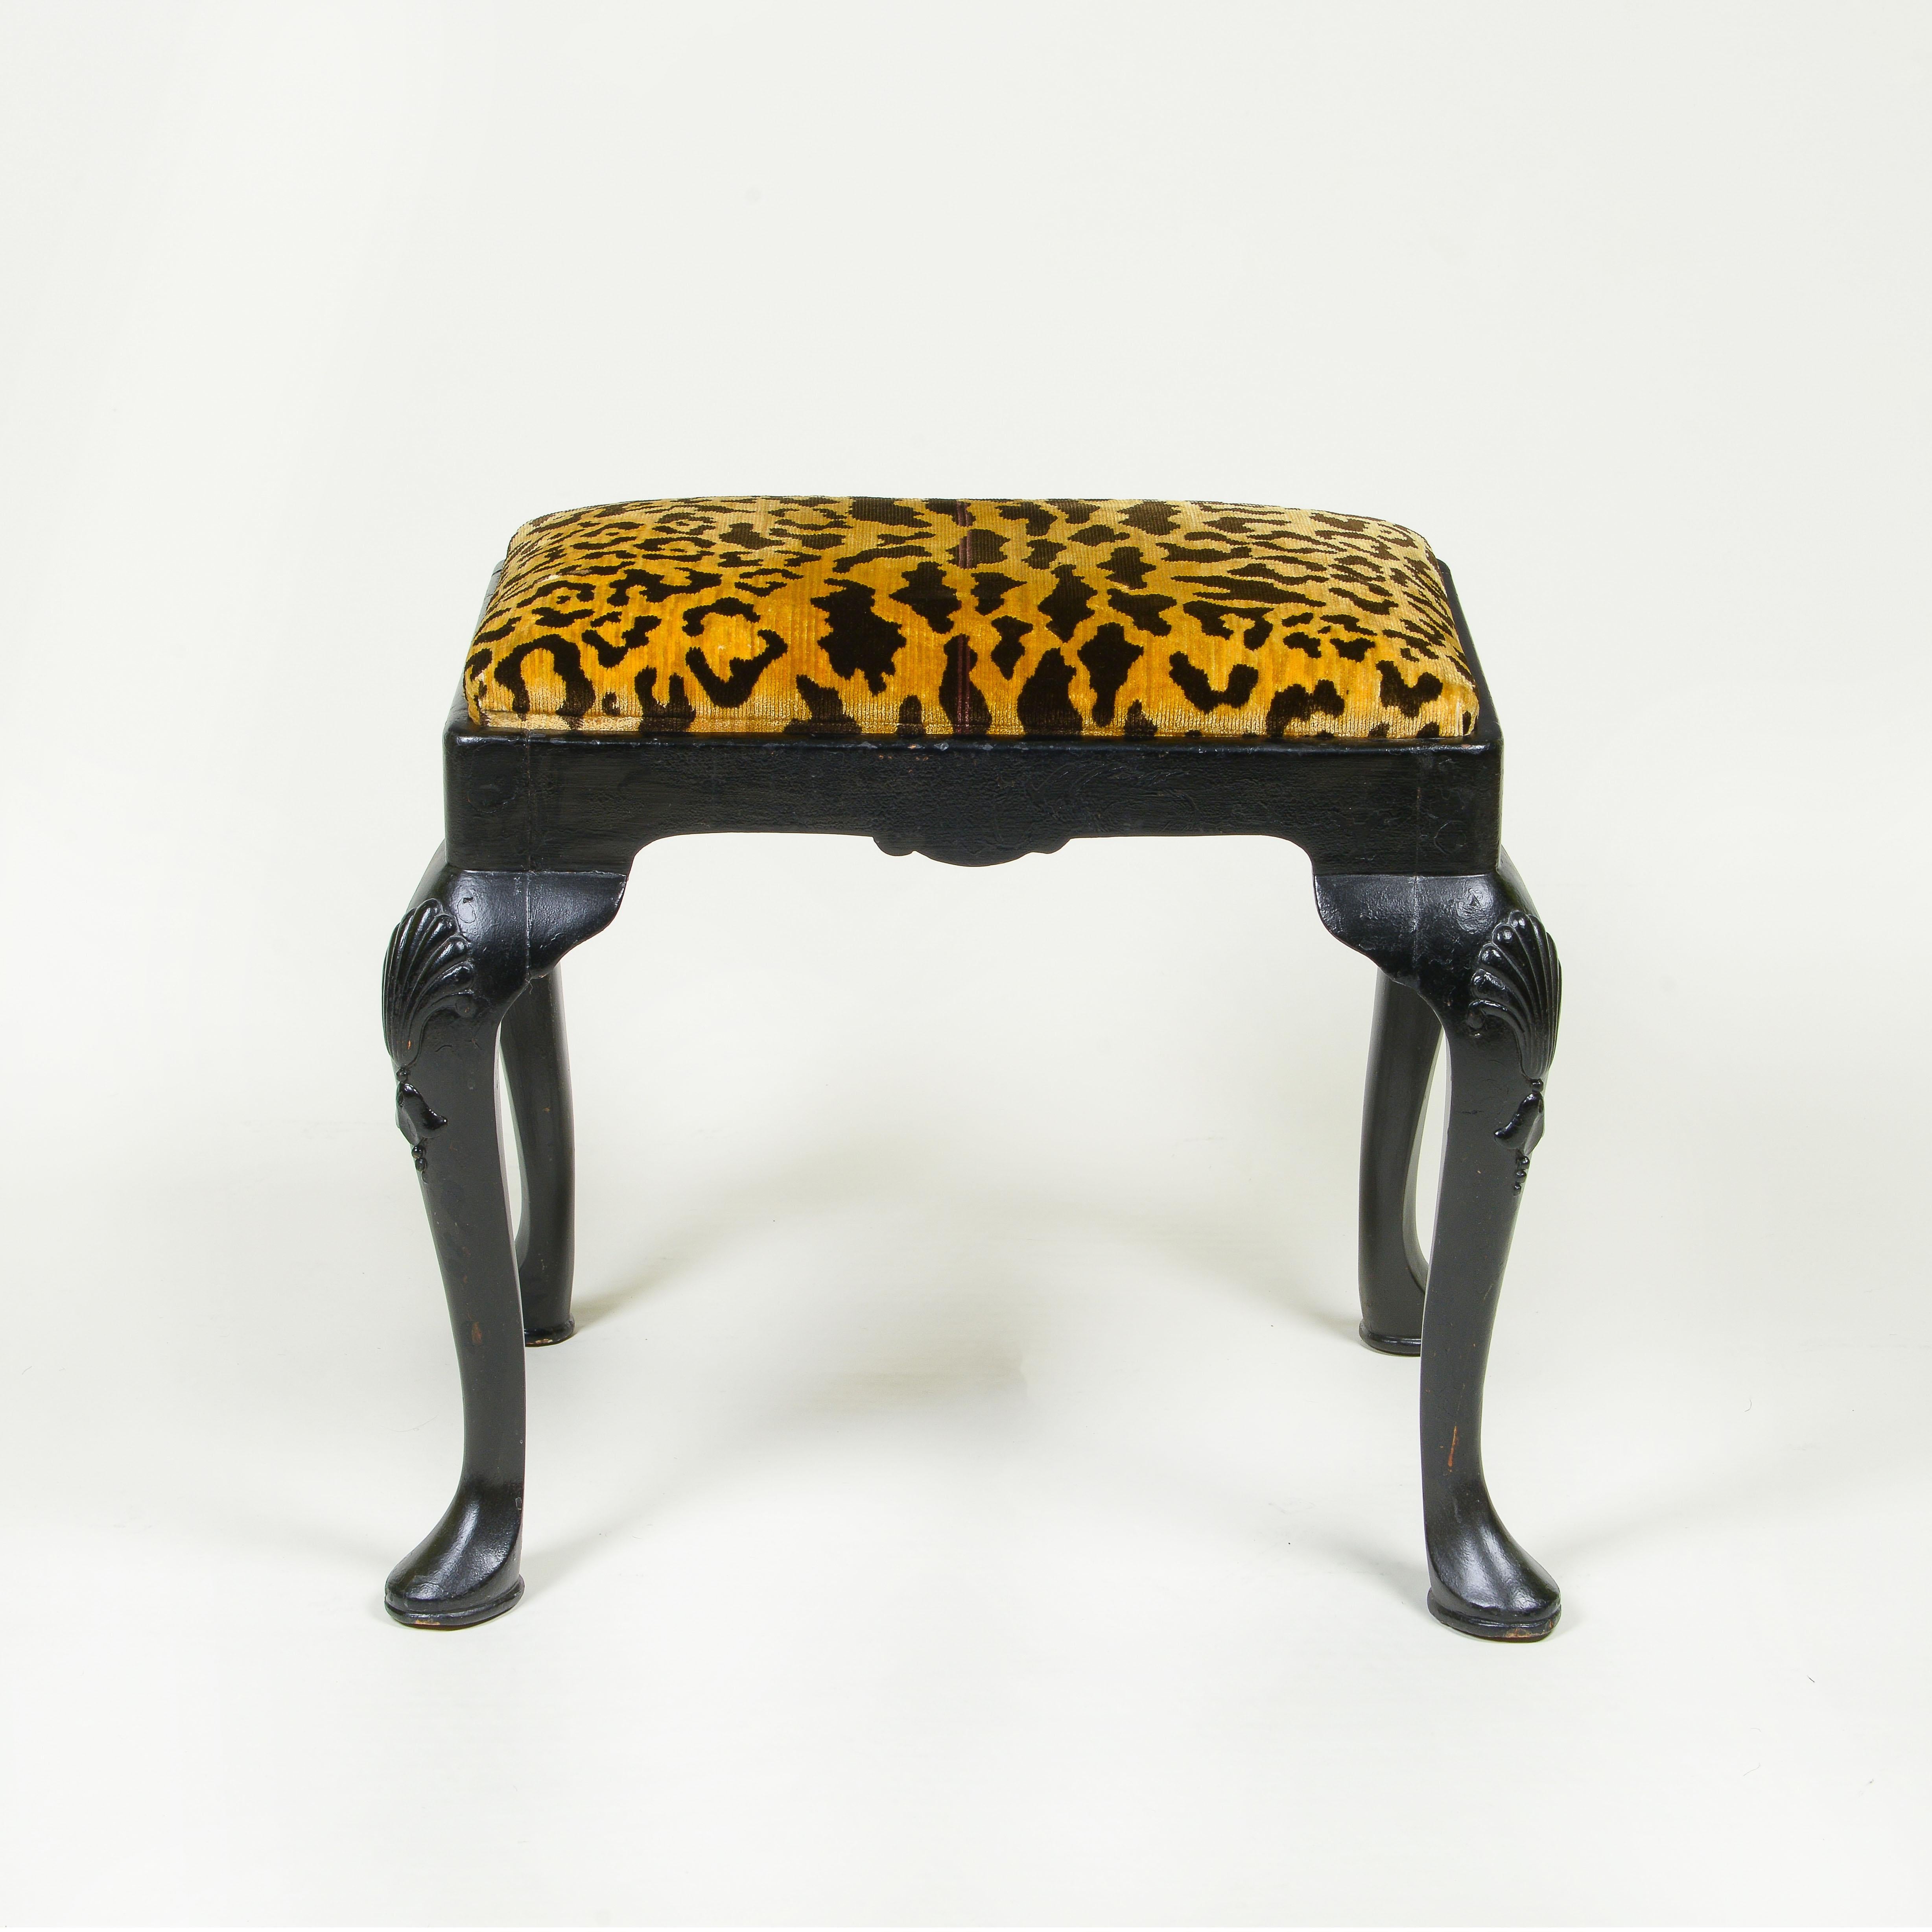 Raised on shell-carved cabriole legs; reupholstered with Clarence House leopard silk velvet.
